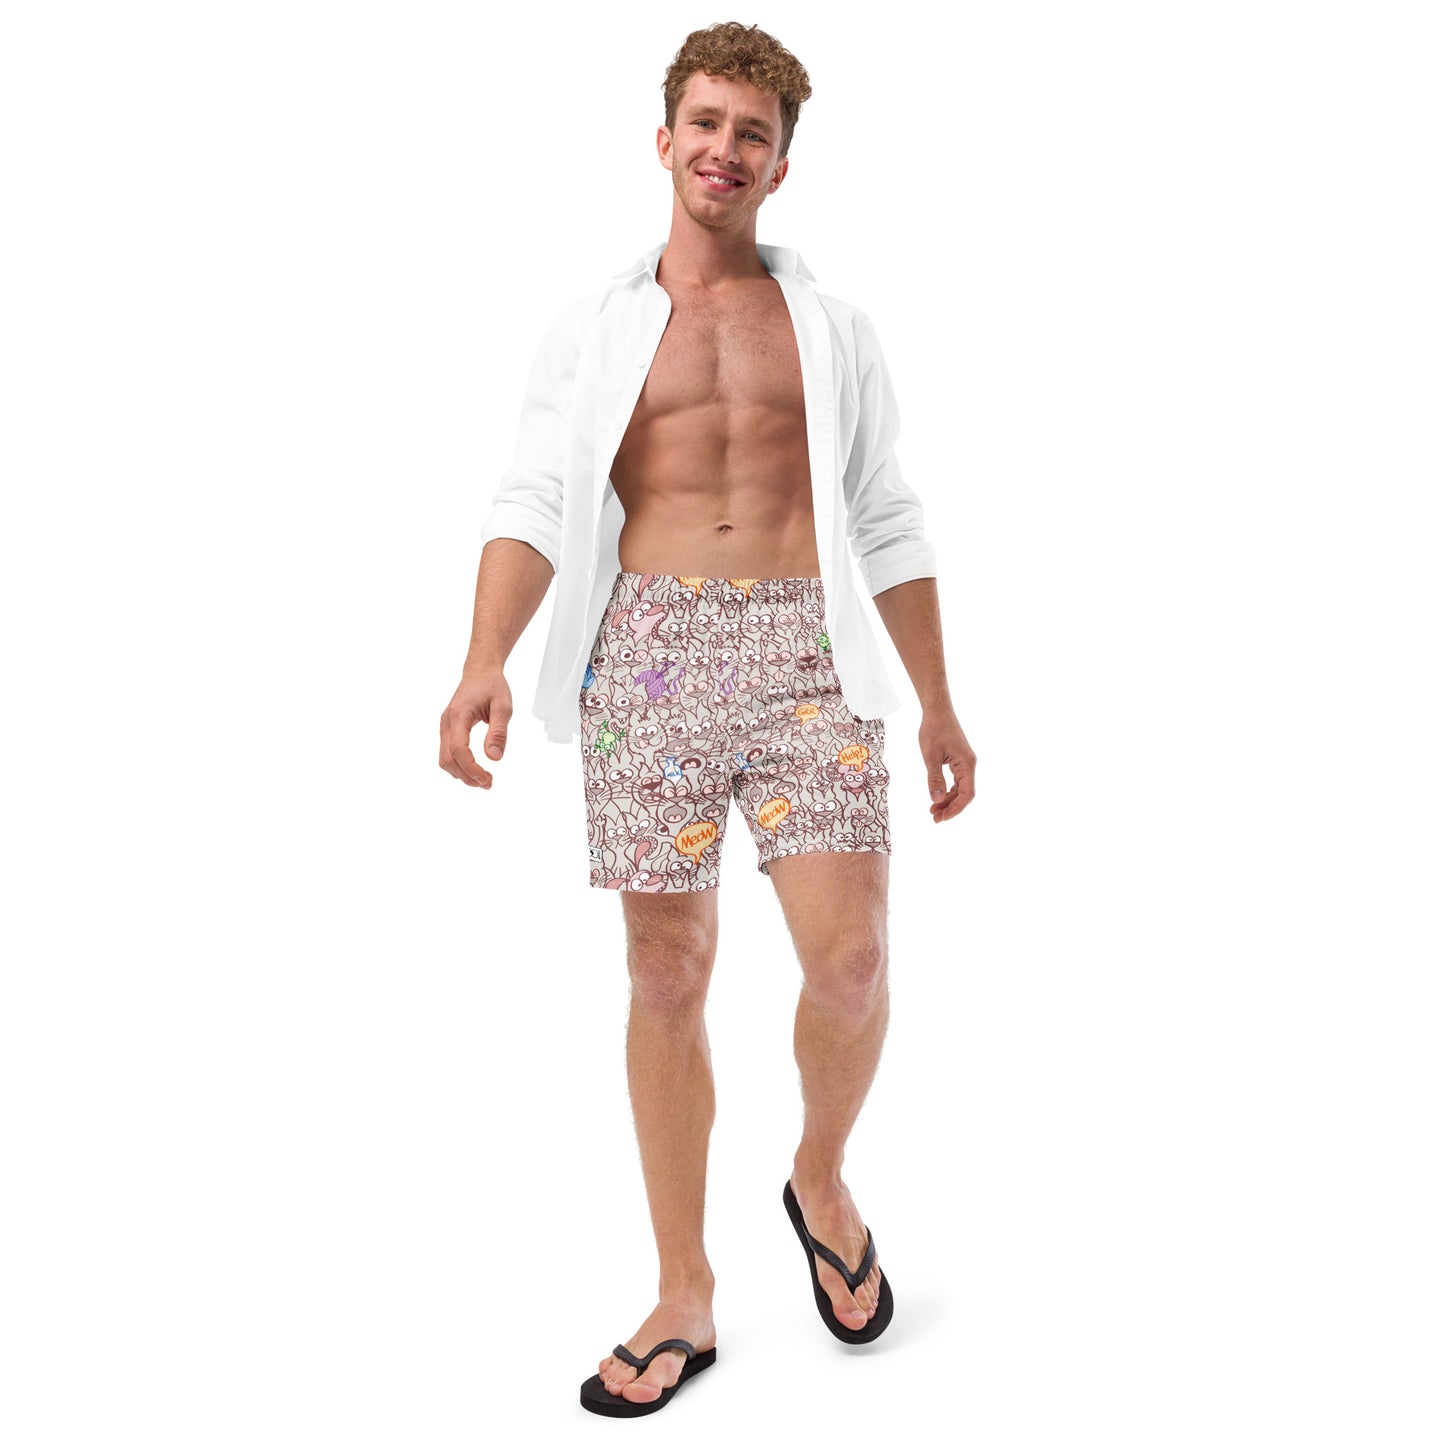 Young man wearing Men's swim trunks All-over printed with Exclusive design only for real cat lovers